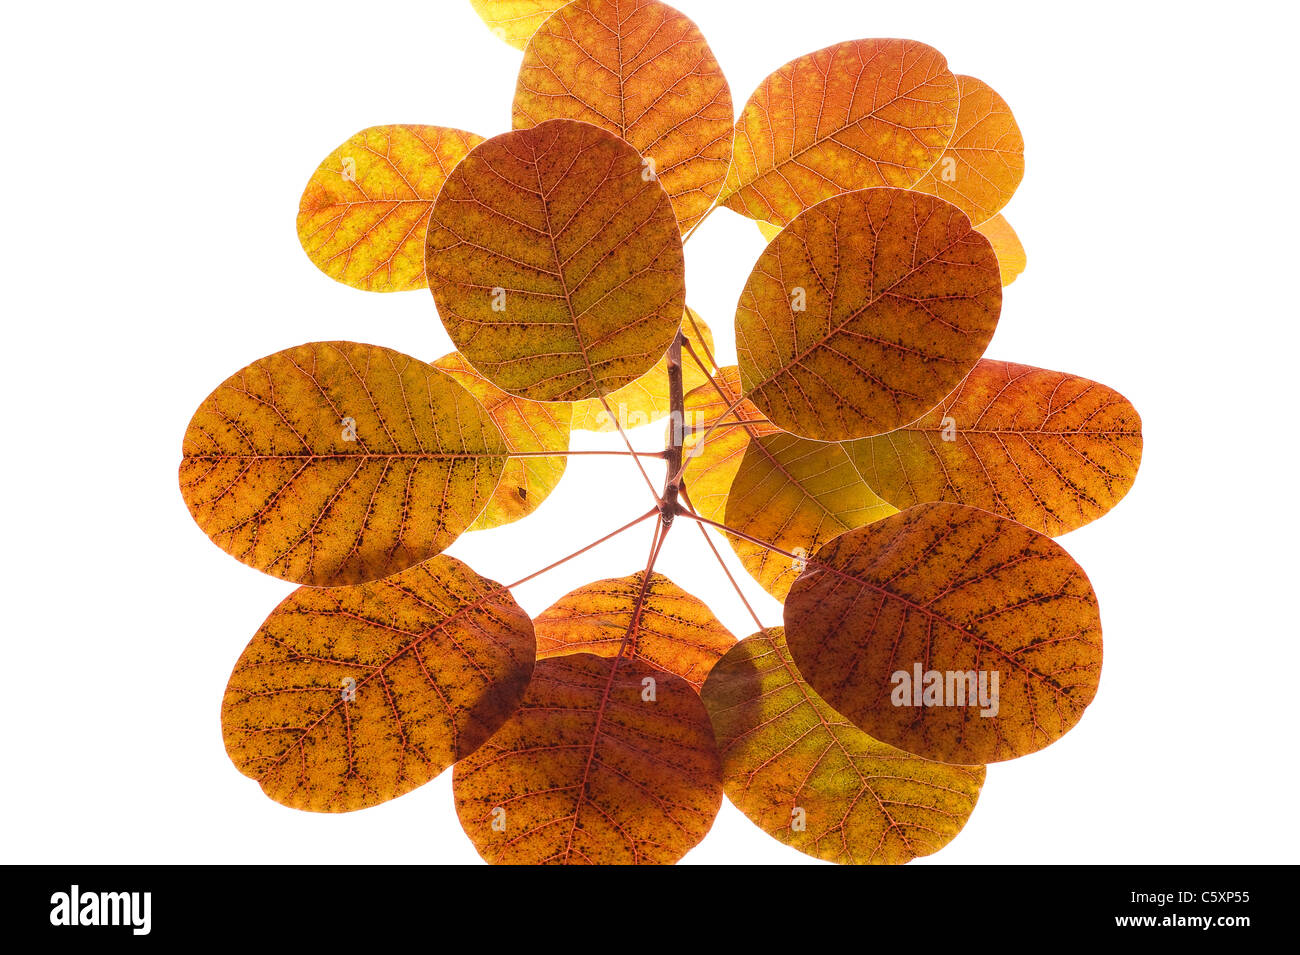 Fall leaves composition on white background Stock Photo